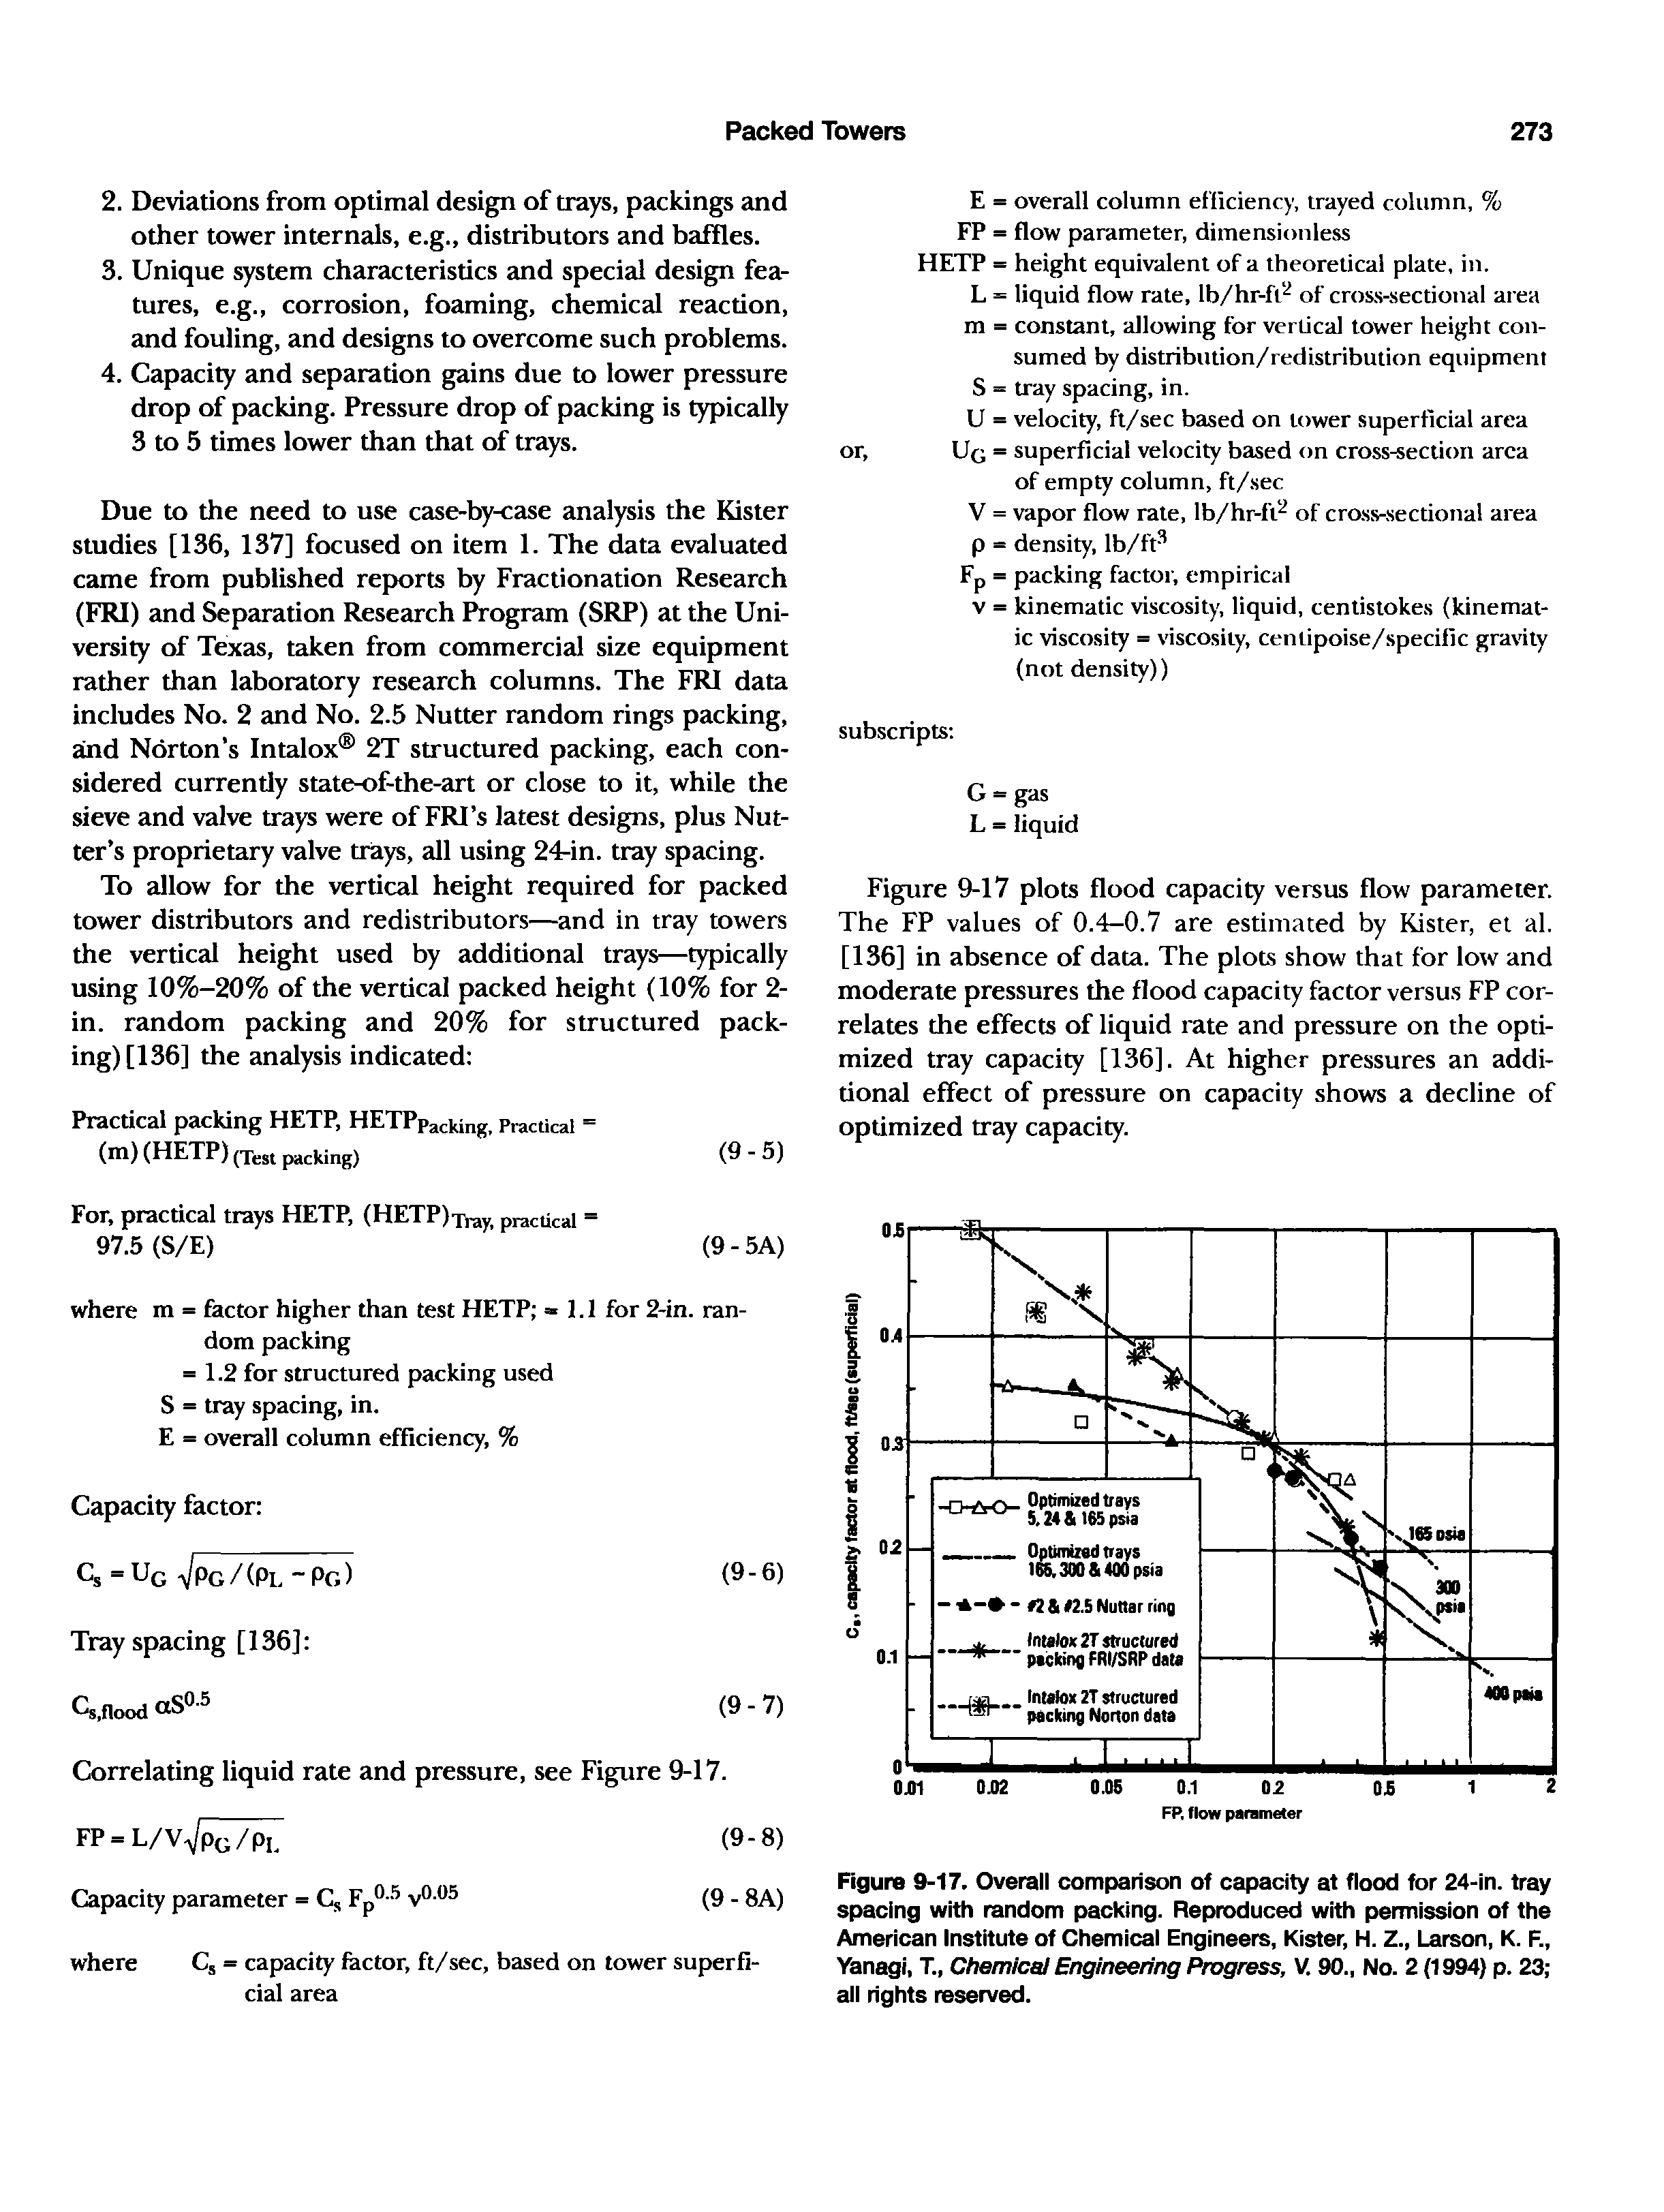 Figure 9-17. Overall comparison of capacity at flood for 24-in. tray spacing with random packing. Reproduced with permission of the American Institute of Chemical Engineers, Kister, H. Z., Larson, K. F., Yanagi, T., Chemical Engineering Progress, V. 90., No. 2 (1994) p. 23 all rights reserved.